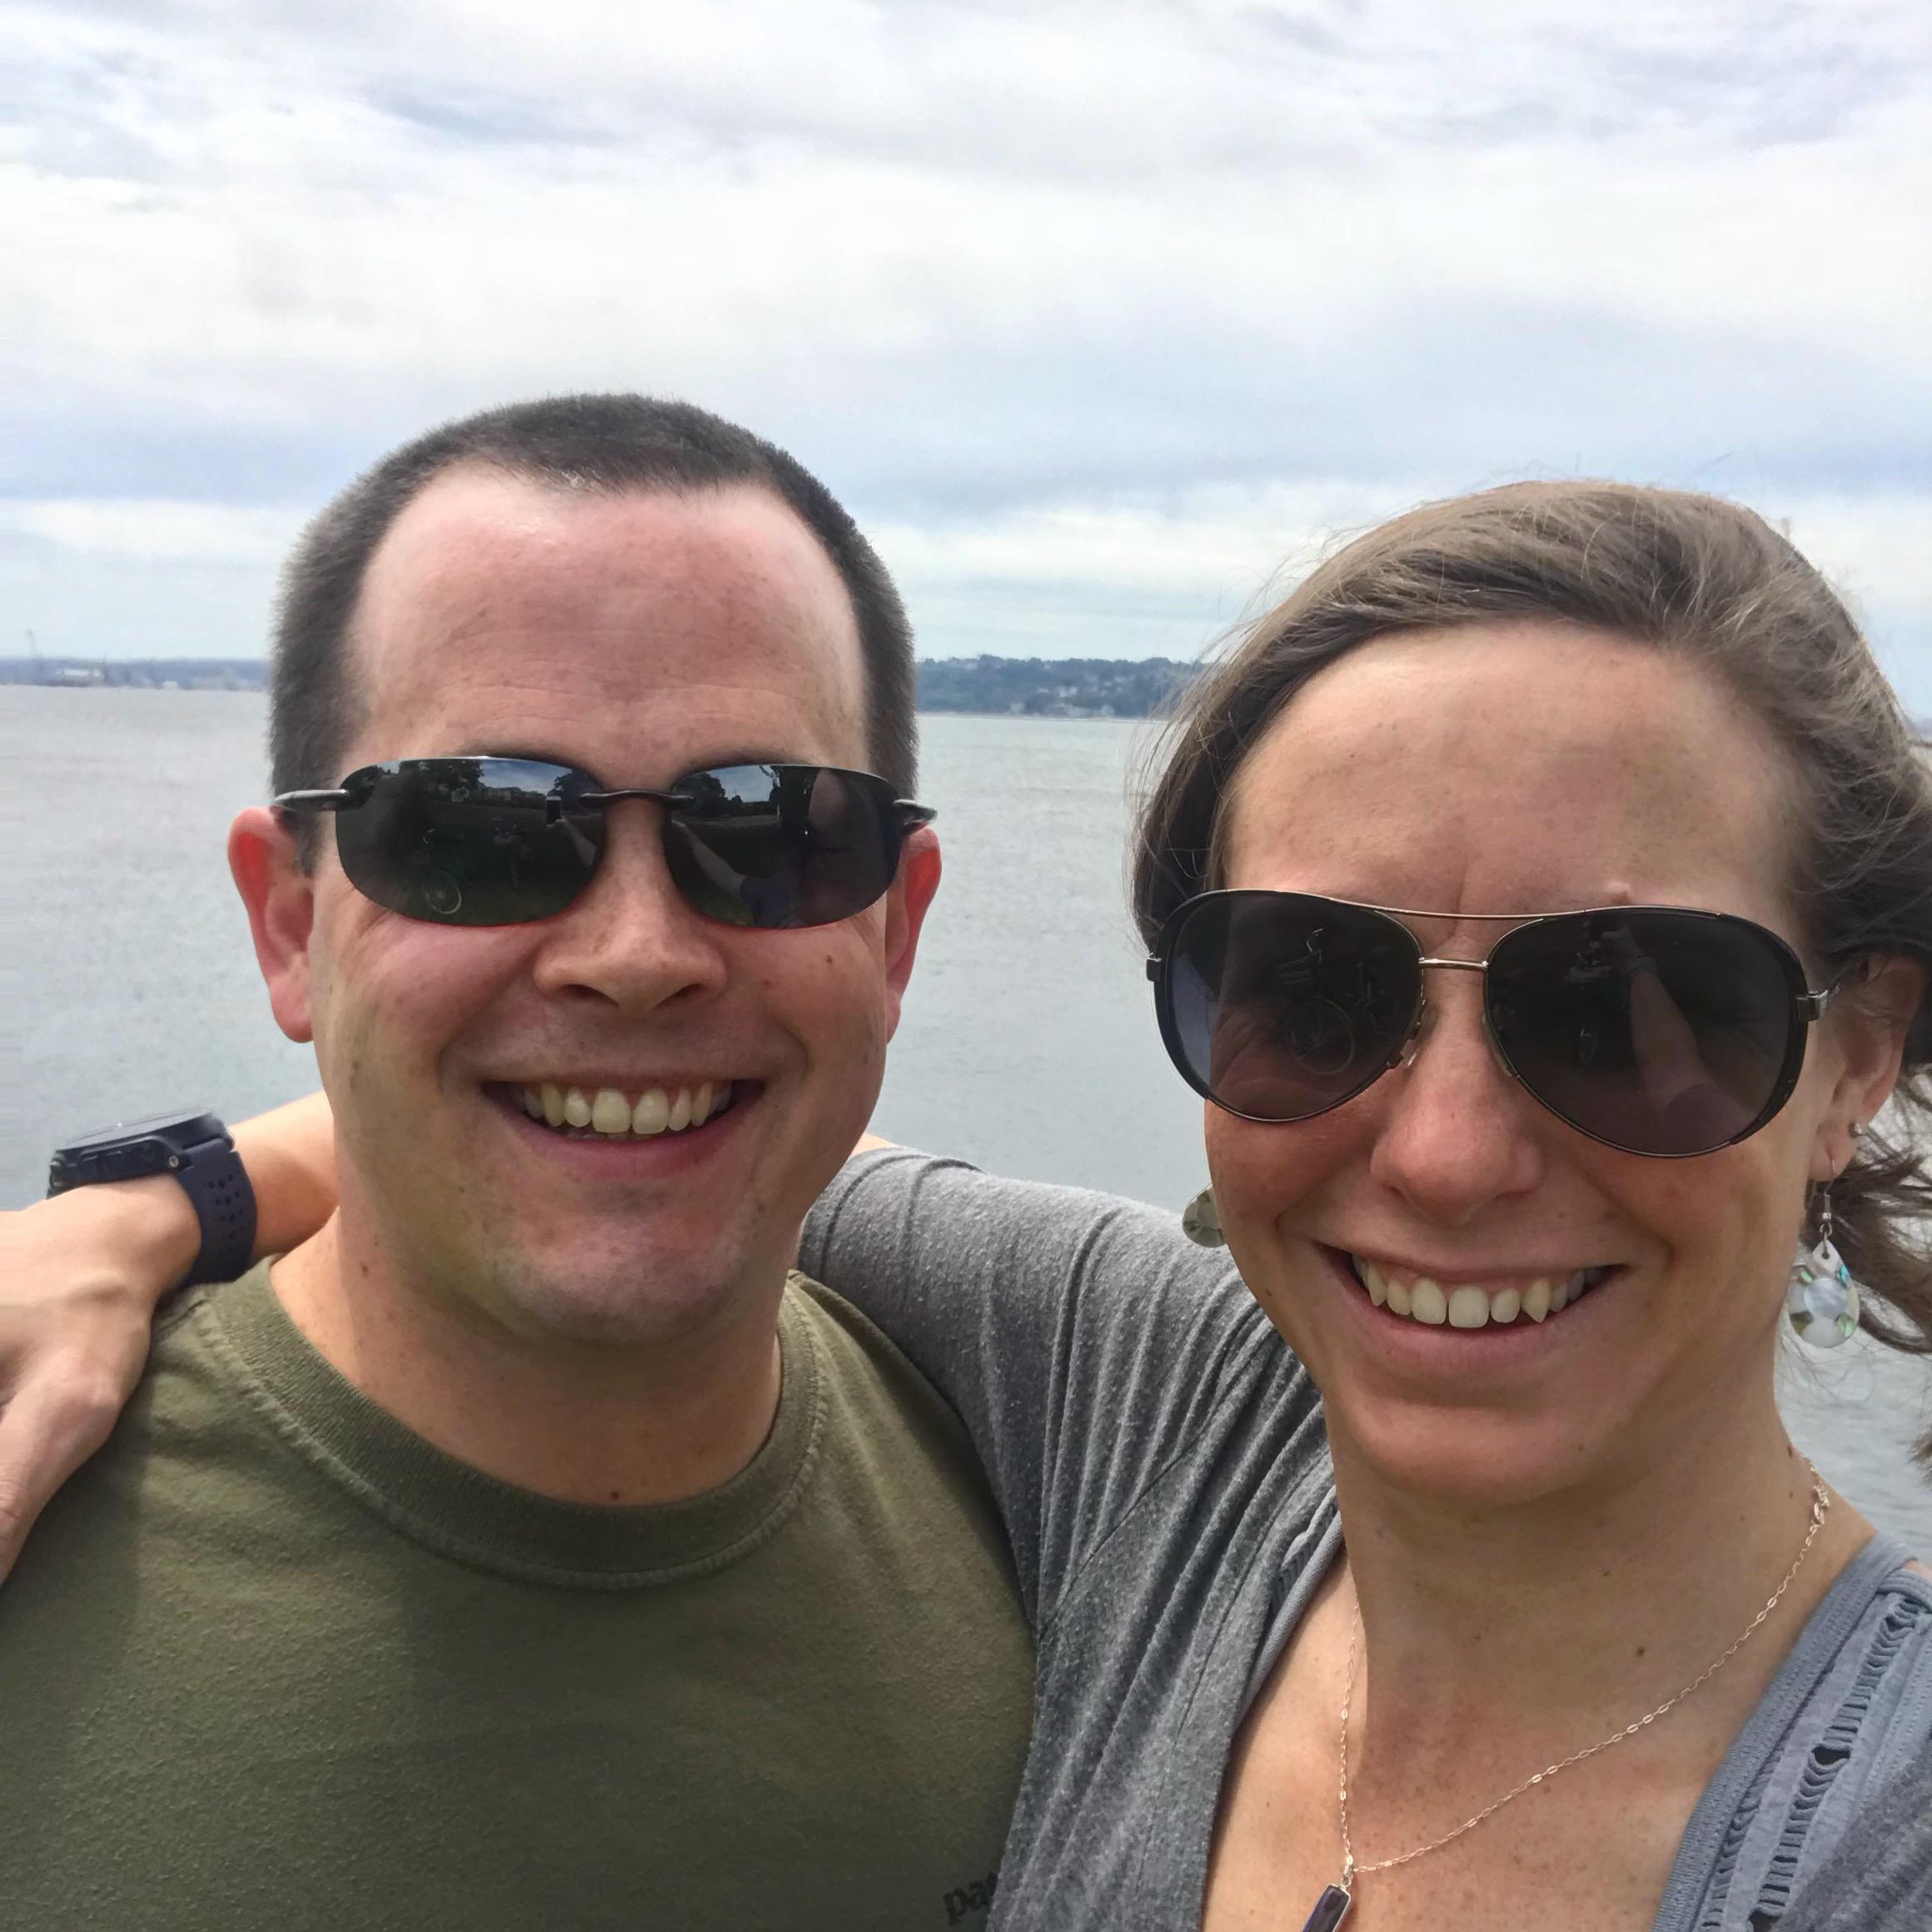 4th of July 2018 - On a bike ride along the Seattle waterfront, on our way to the Mariners game.